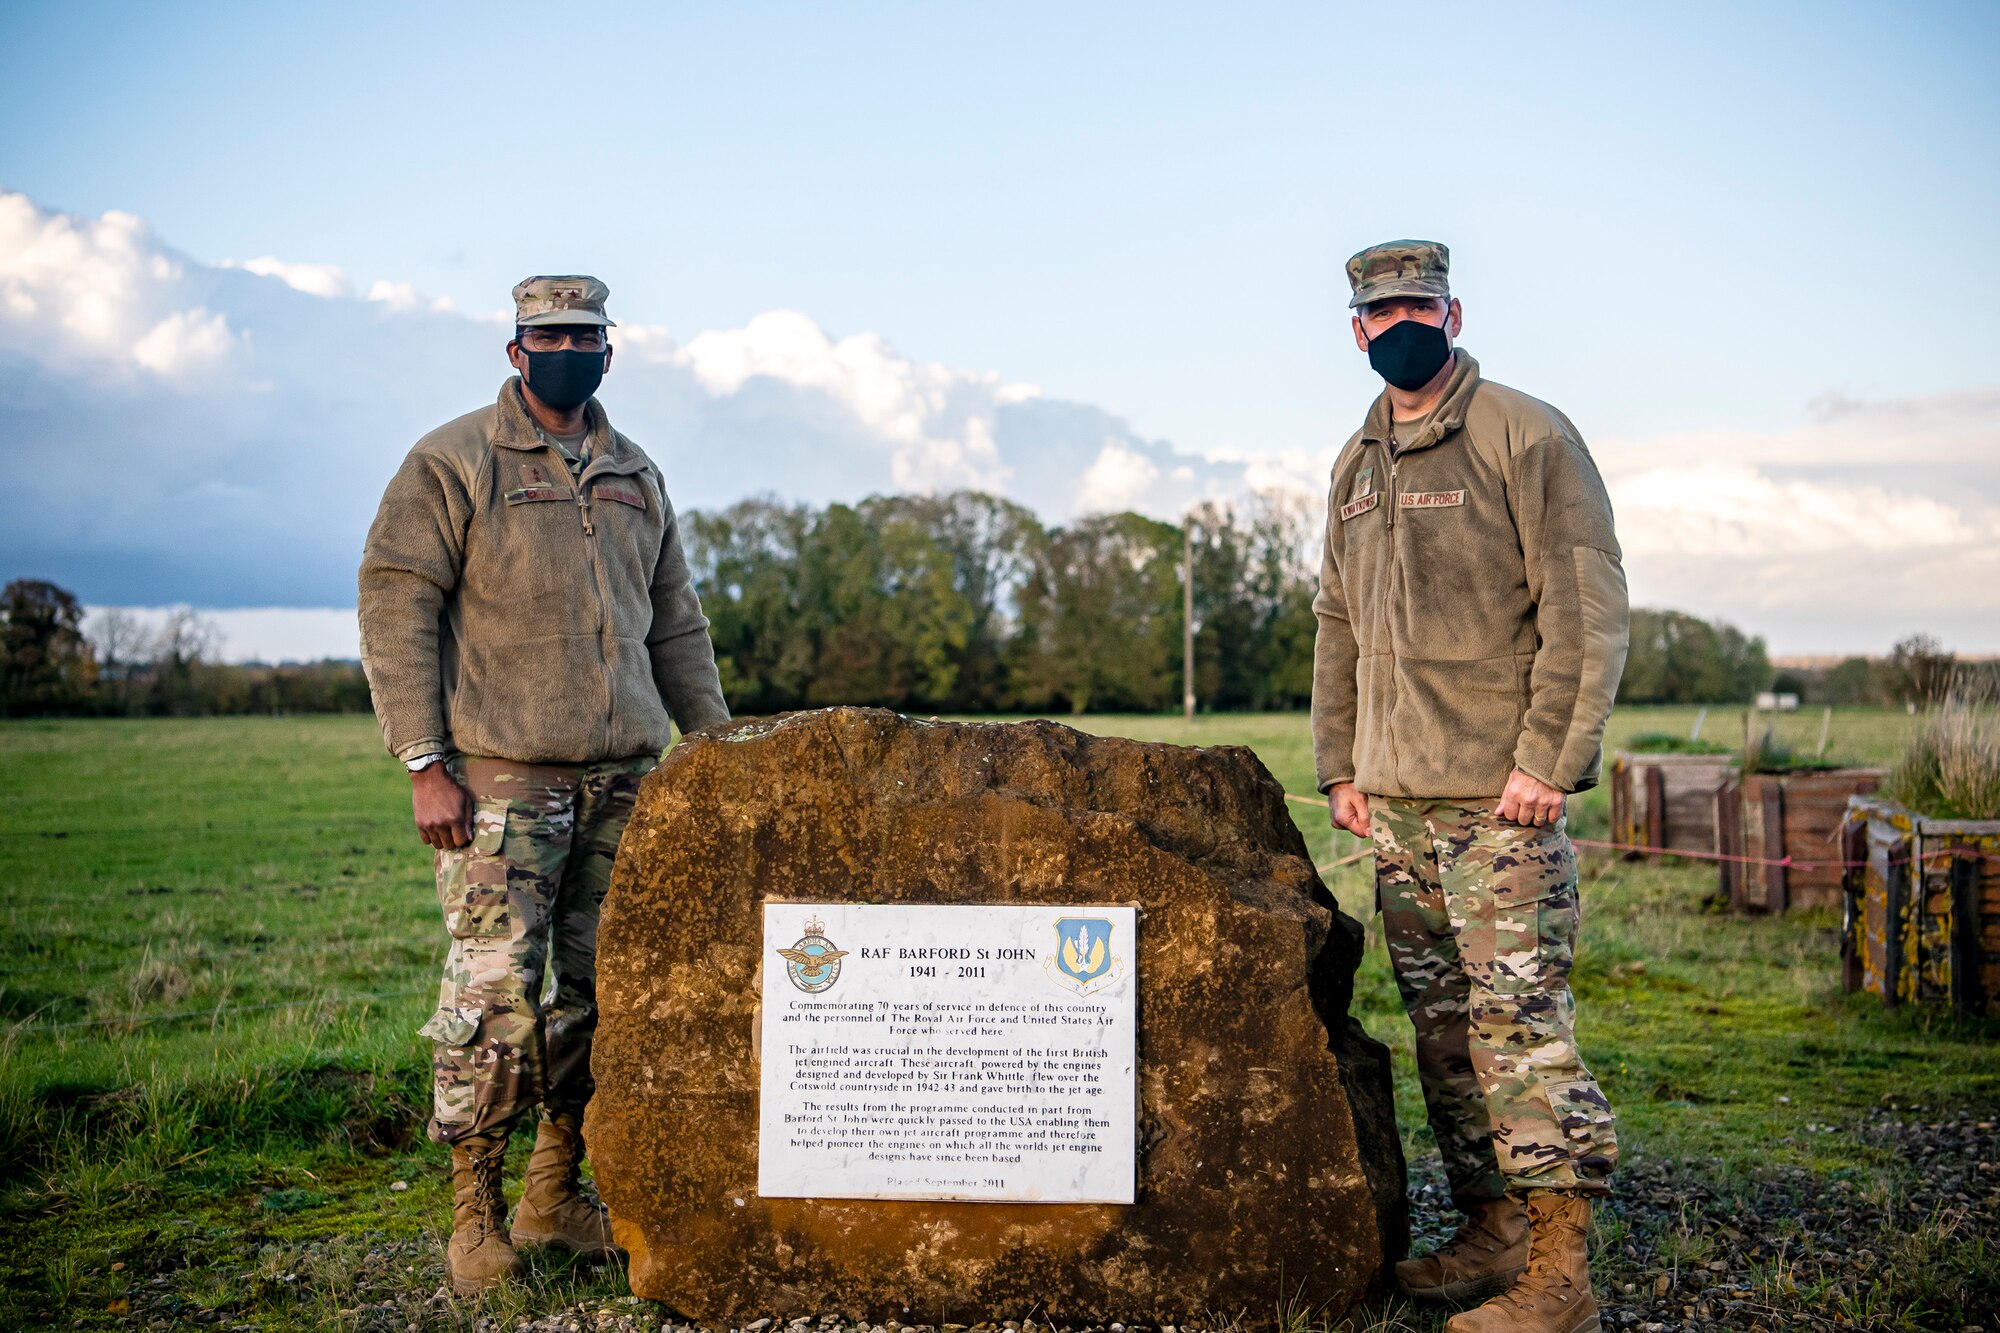 U.S. Air Force Maj. Gen. Randall Reed (left), Third Air Force commander and Chief Master Sgt. Randy Kwiatkowski (right), poses for a photo next to a monument at Royal Air Force Barford St. John, England, Oct. 27, 2020. The Third Air Force command team visited RAF Barford St. John to speak with and recognize the 422nd CS Airmen as well as visit the base’s monuments to pay homage to the installation’s rich history. (U.S. Air Force photo by Senior Airman Eugene Oliver)